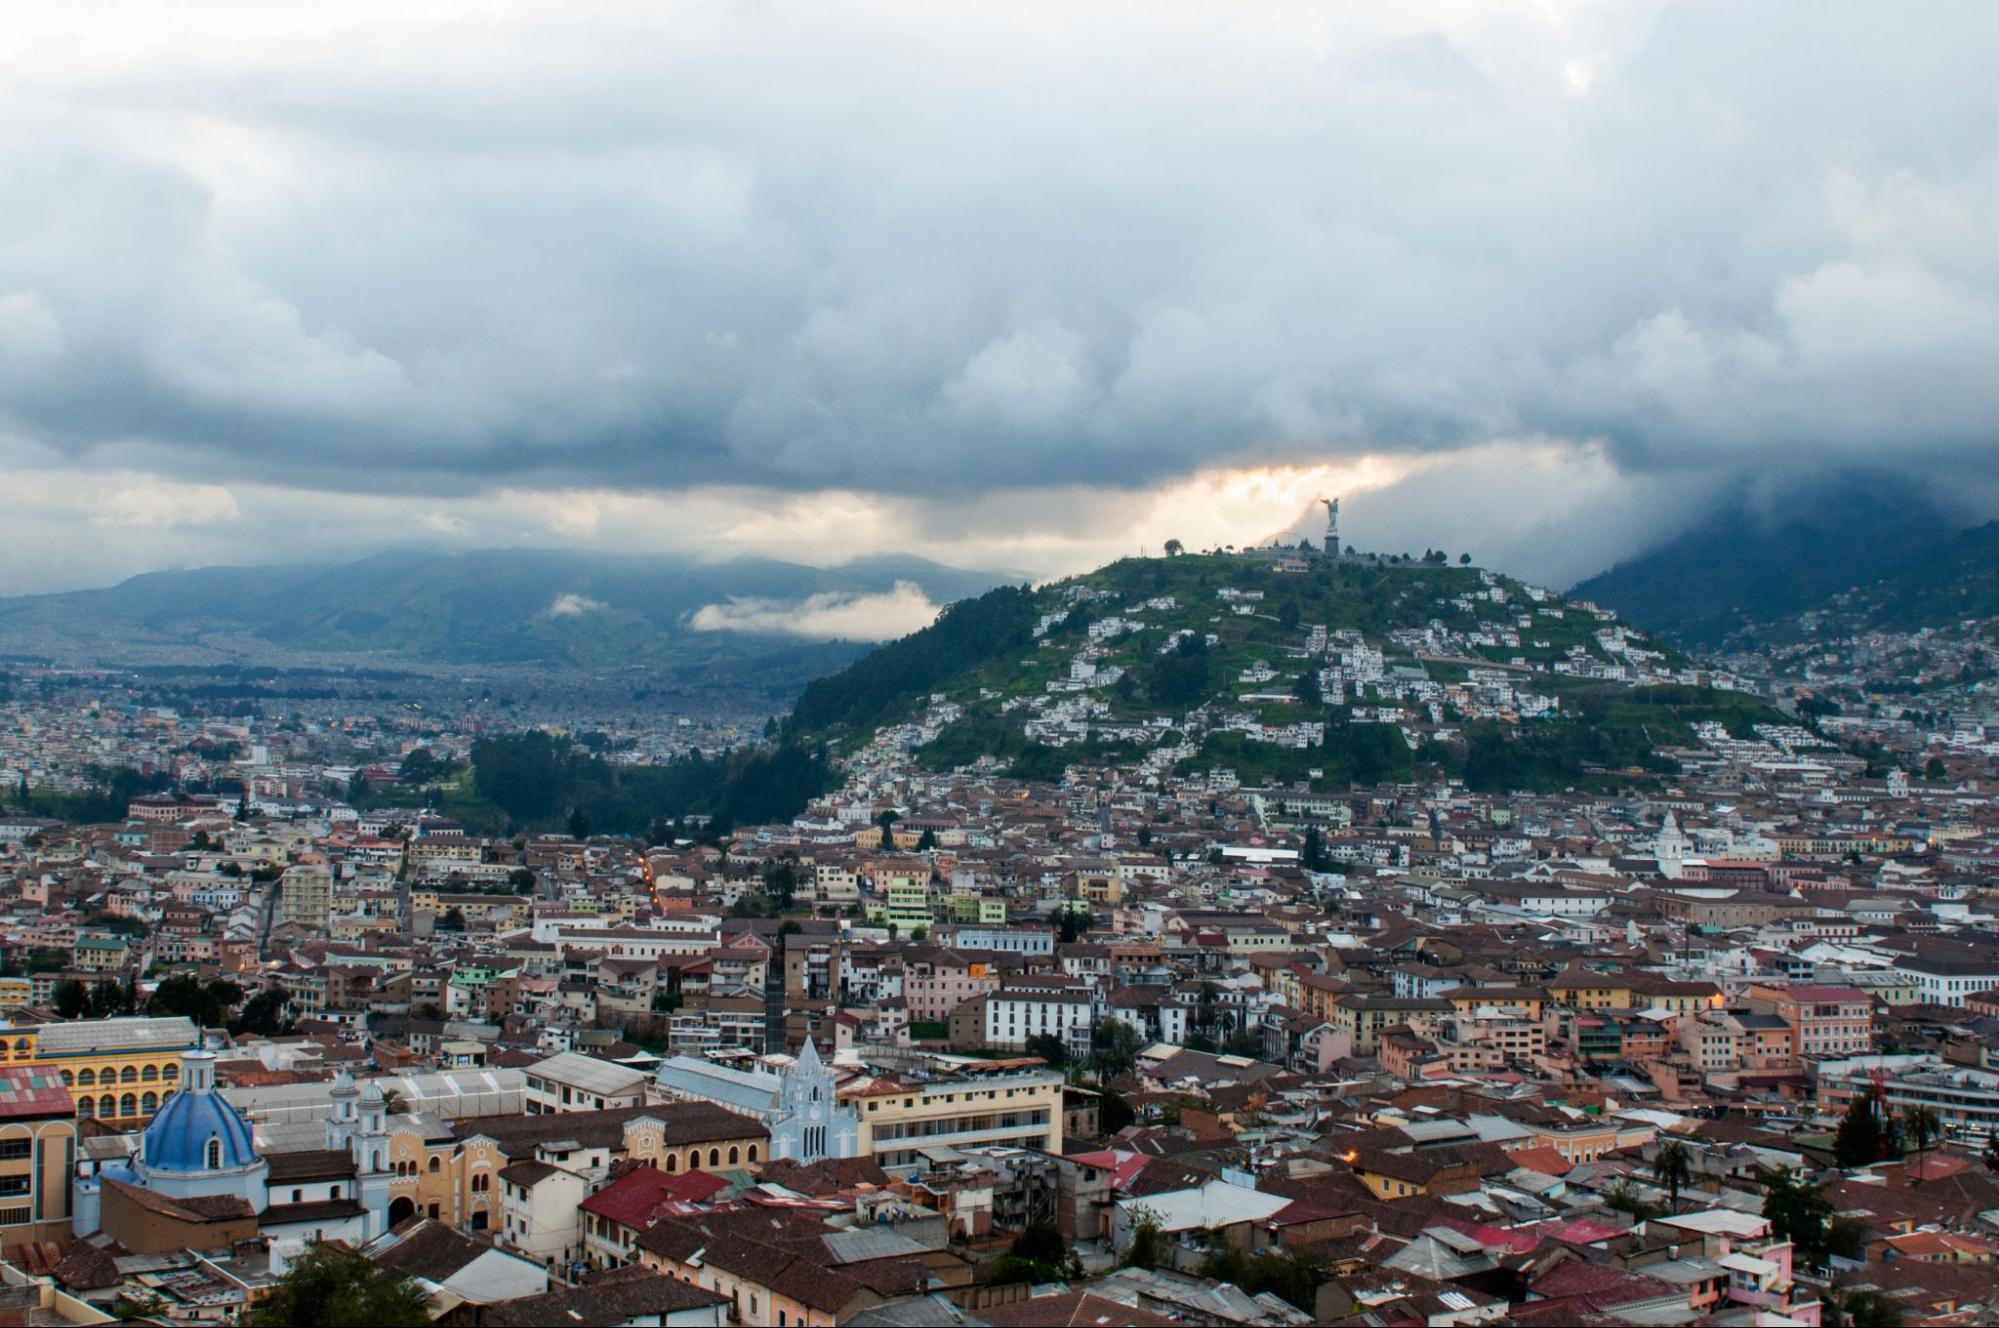 panorama of the old Quito at sunset